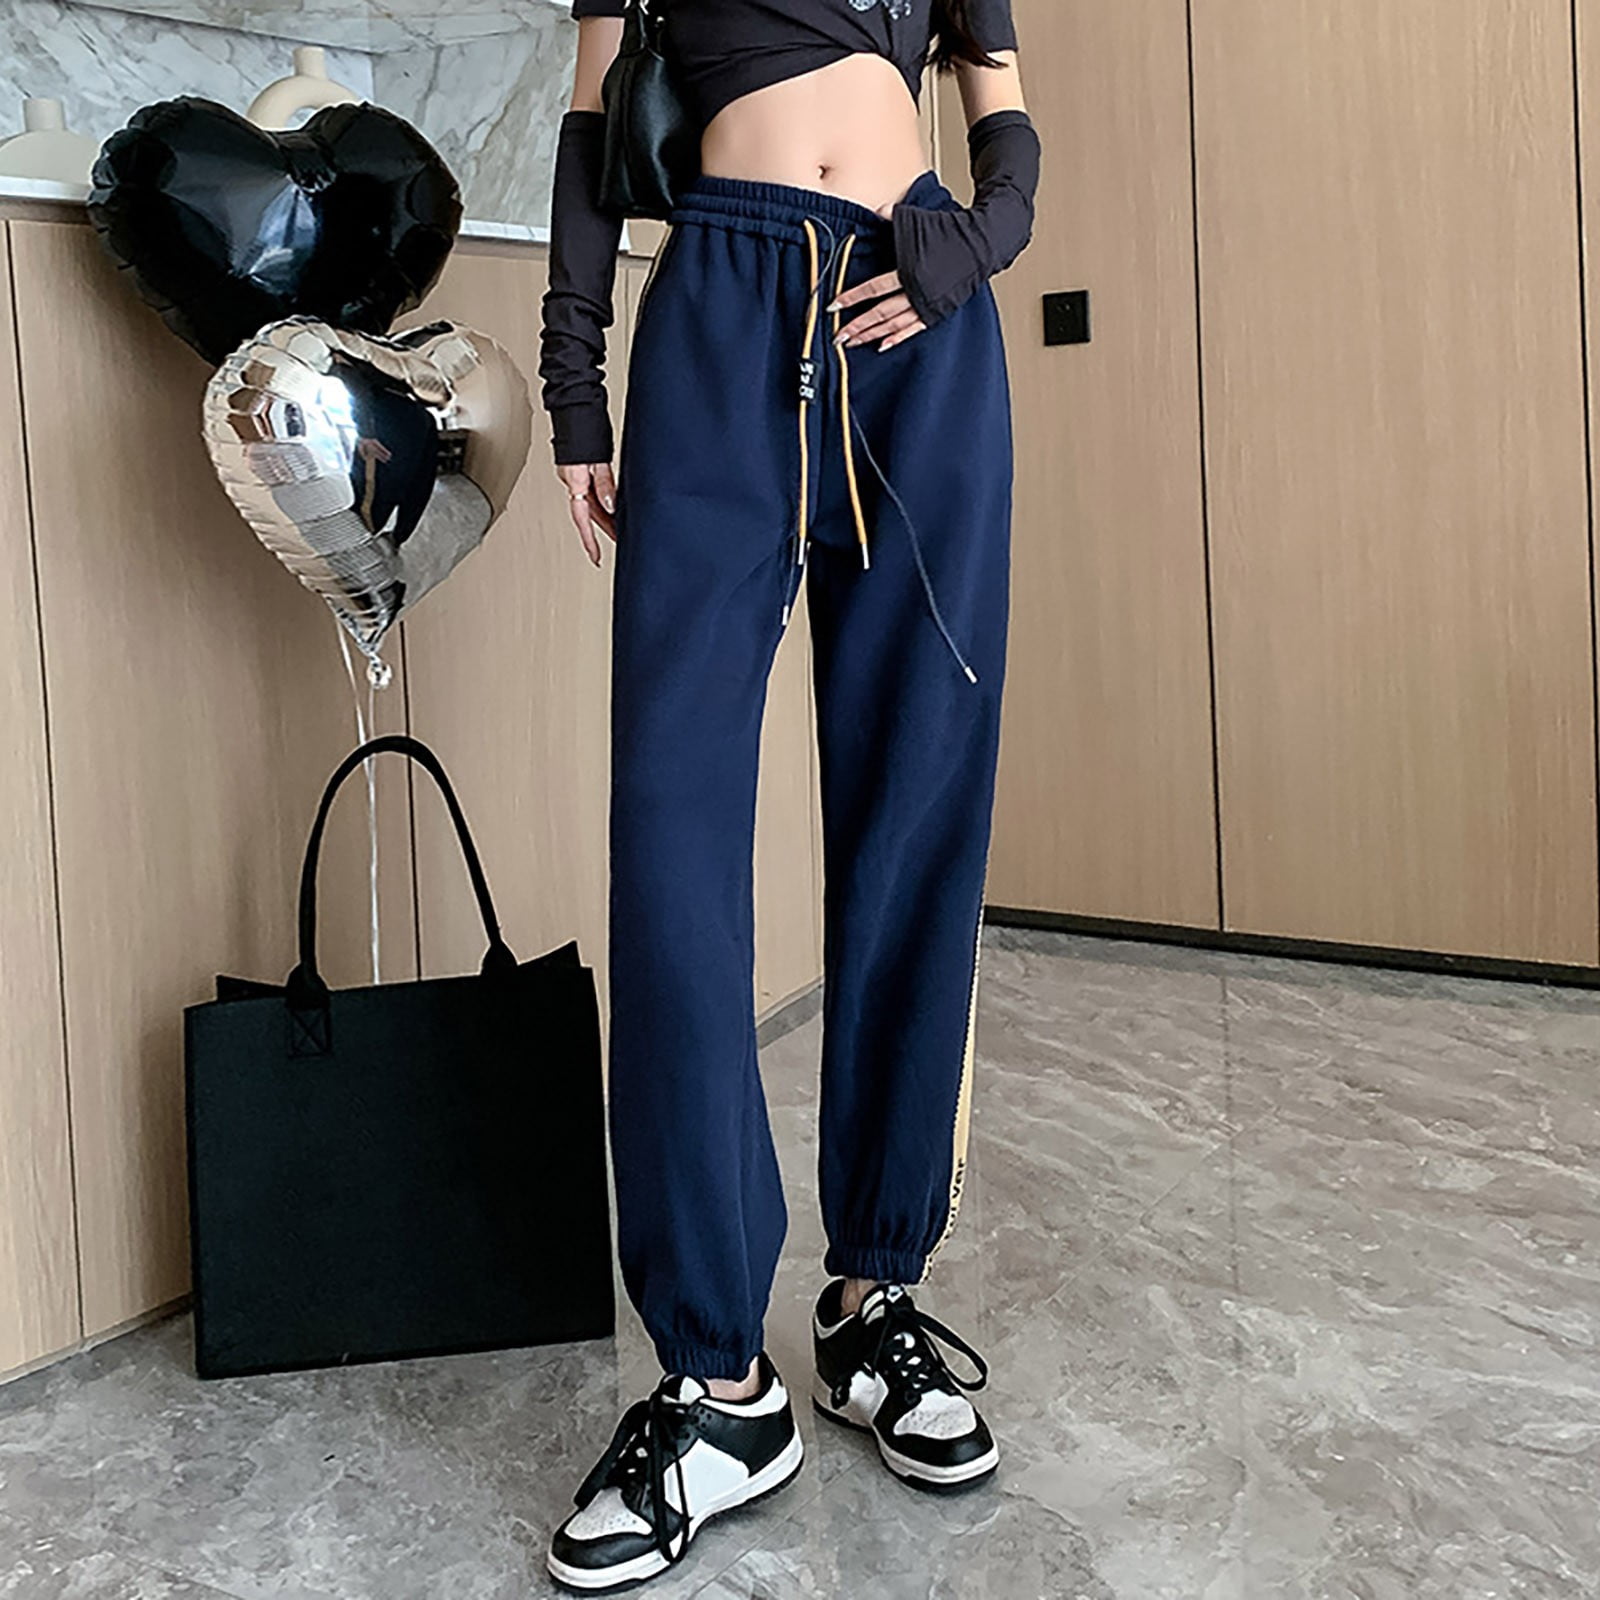 Graphic Track Pants CY316